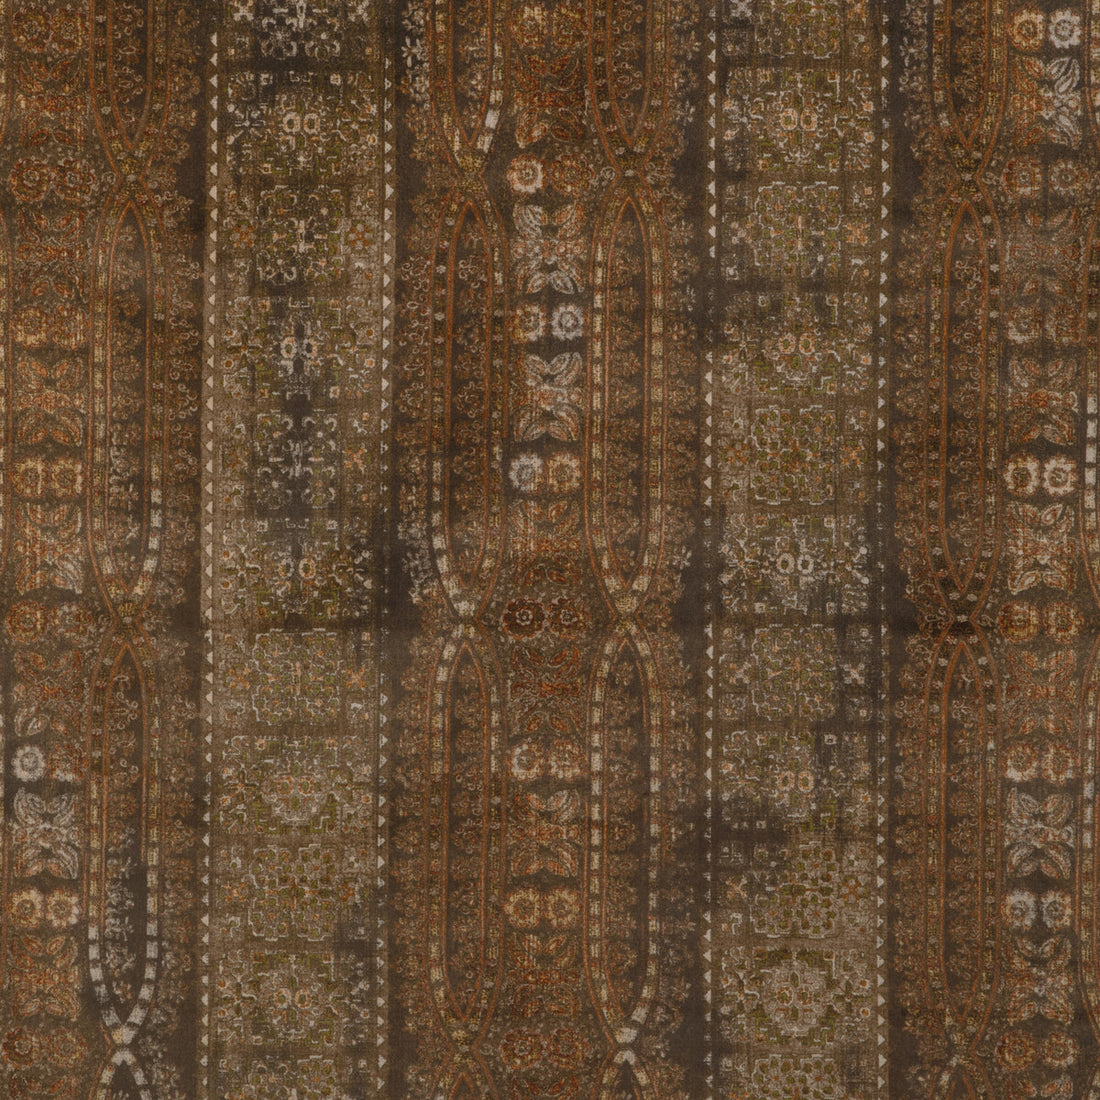 Brympton Velvet fabric in umber color - pattern 2023114.64.0 - by Lee Jofa in the Barwick Velvets collection